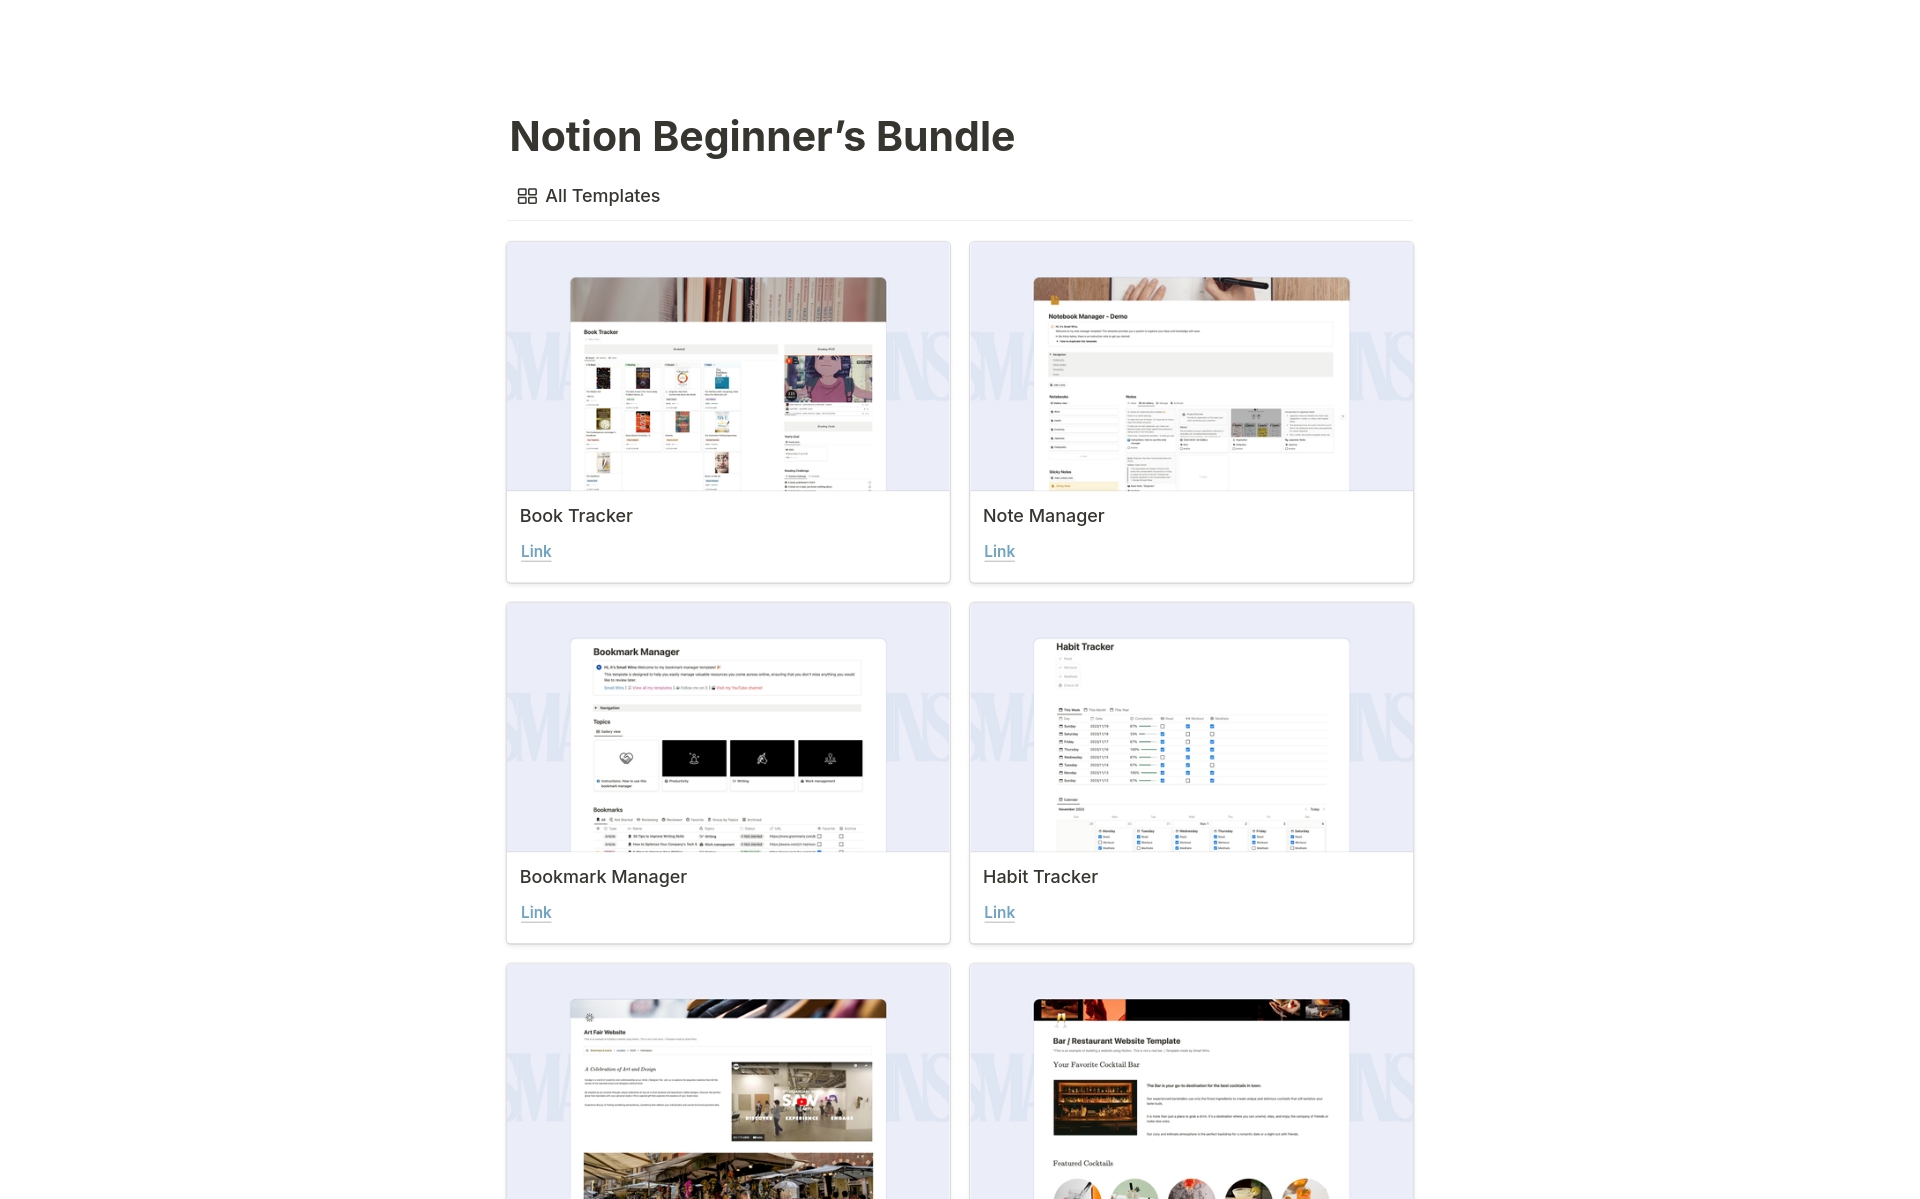 New to Notion and looking for a way to kickstart your productivity? This Bundle is designed especially for you. Access to all 6 of my carefully created free Notion templates! Each template is designed to solve specific problems and make your work or life more efficient.